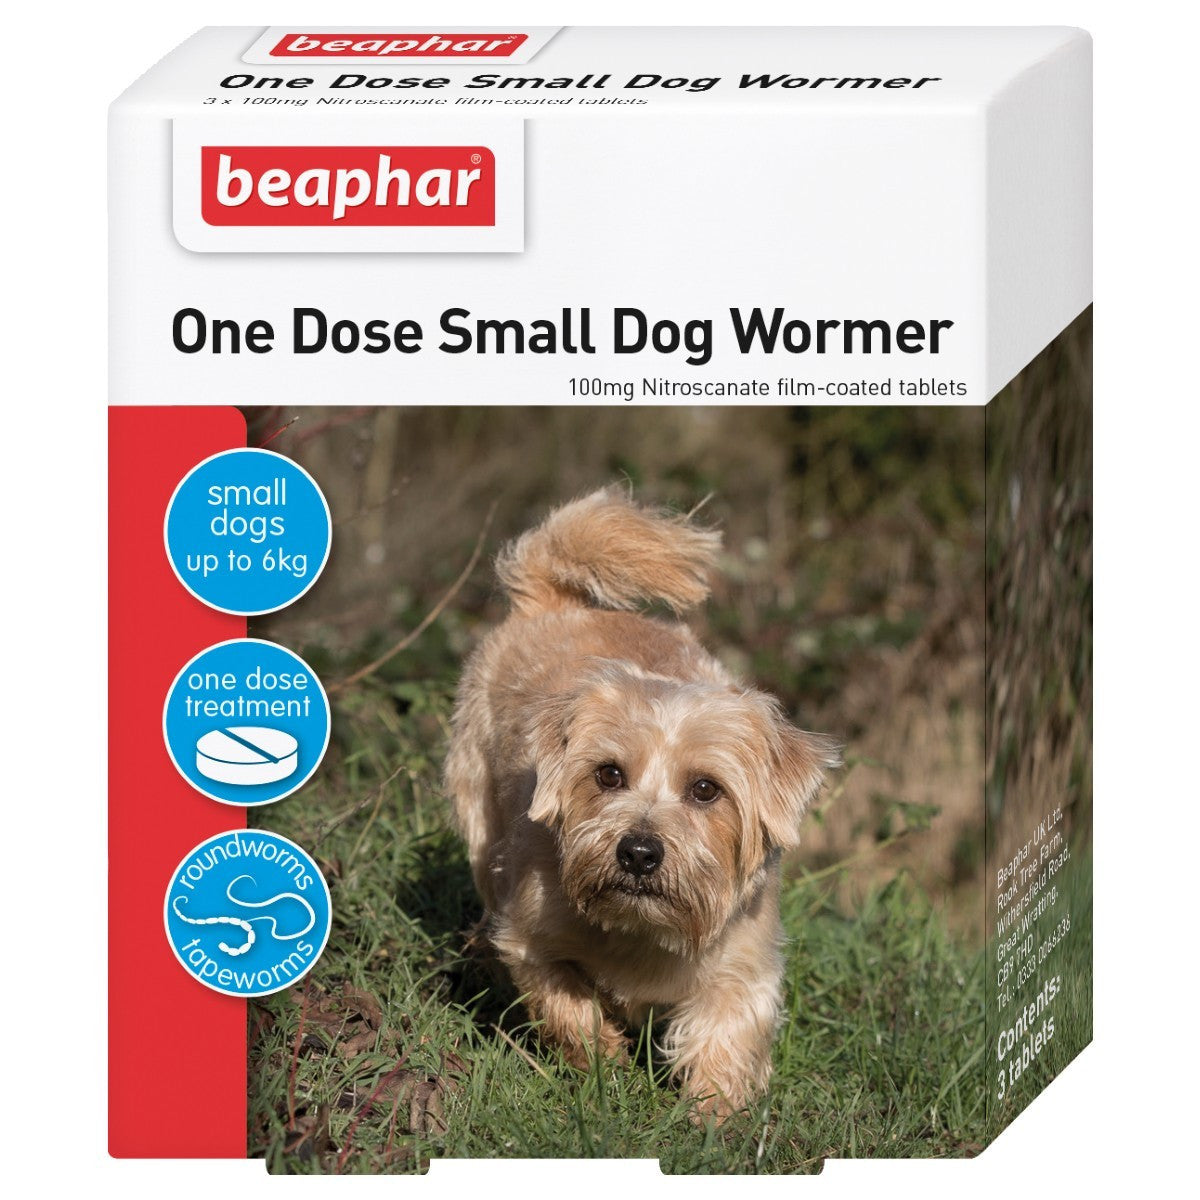 Beaphar One Dose Wormer For Small Dogs & Puppies - 3 Tablets